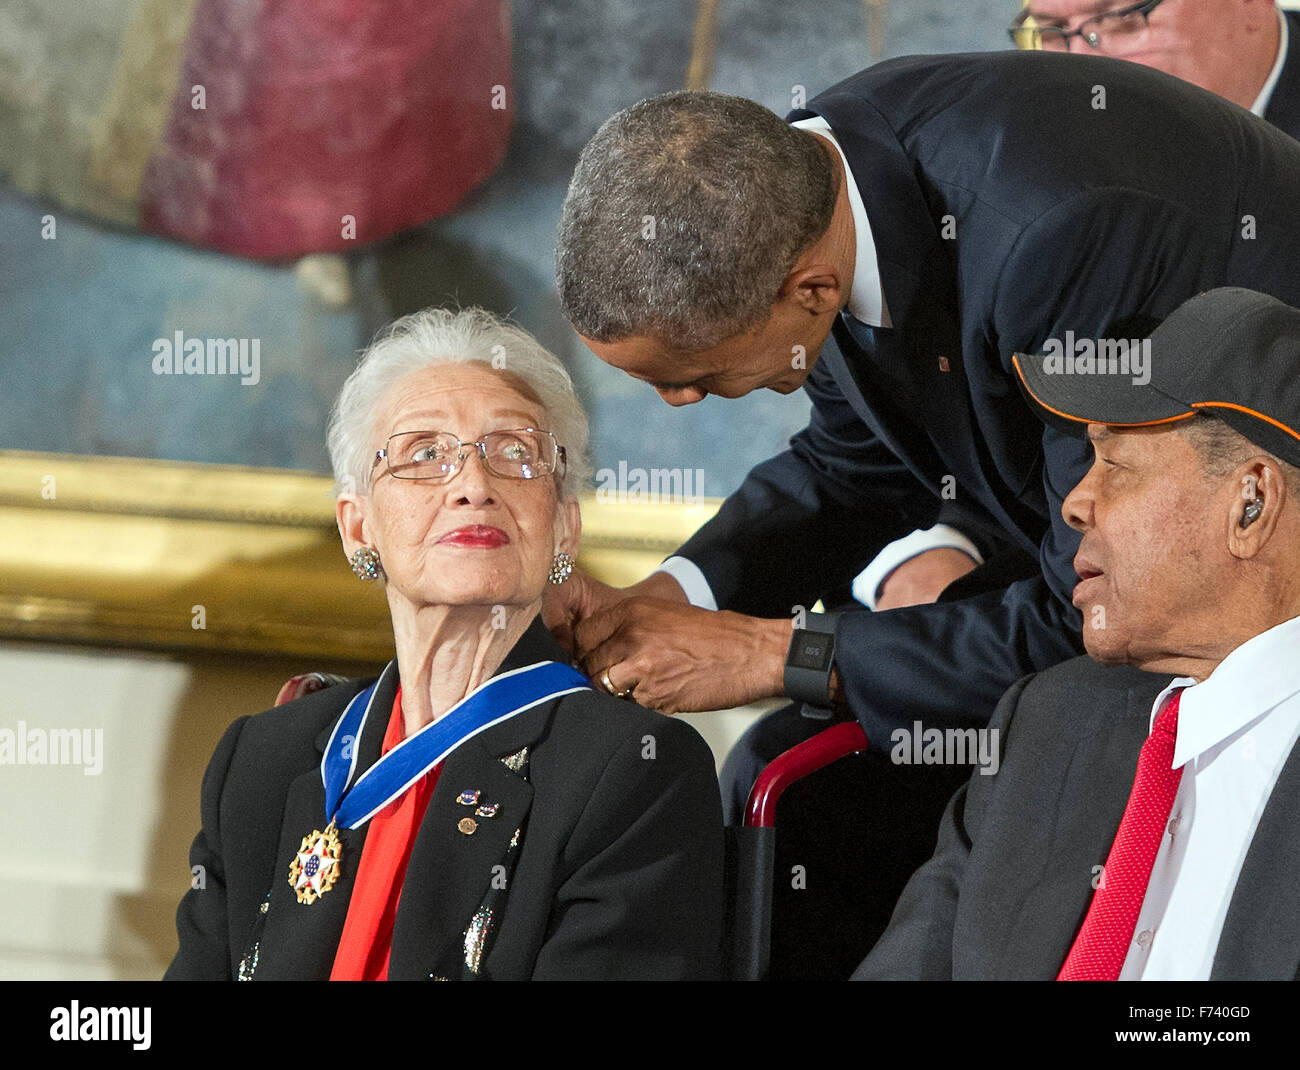 Katherine G. Johnson, a NASA mathematician, receives the Presidential Medal of Freedom from United States President Barack Obama during a ceremony in the East Room of the White House in Washington, DC on Tuesday, November 24, 2015. The Medal is the highest US civilian honor, presented to individuals who have made especially meritorious contributions to the security or national interests of the US, to world peace, or to cultural or significant public or private endeavors. Photo: Ron Sachs/CNP/dpa - NO WIRE SERVICE - Stock Photo